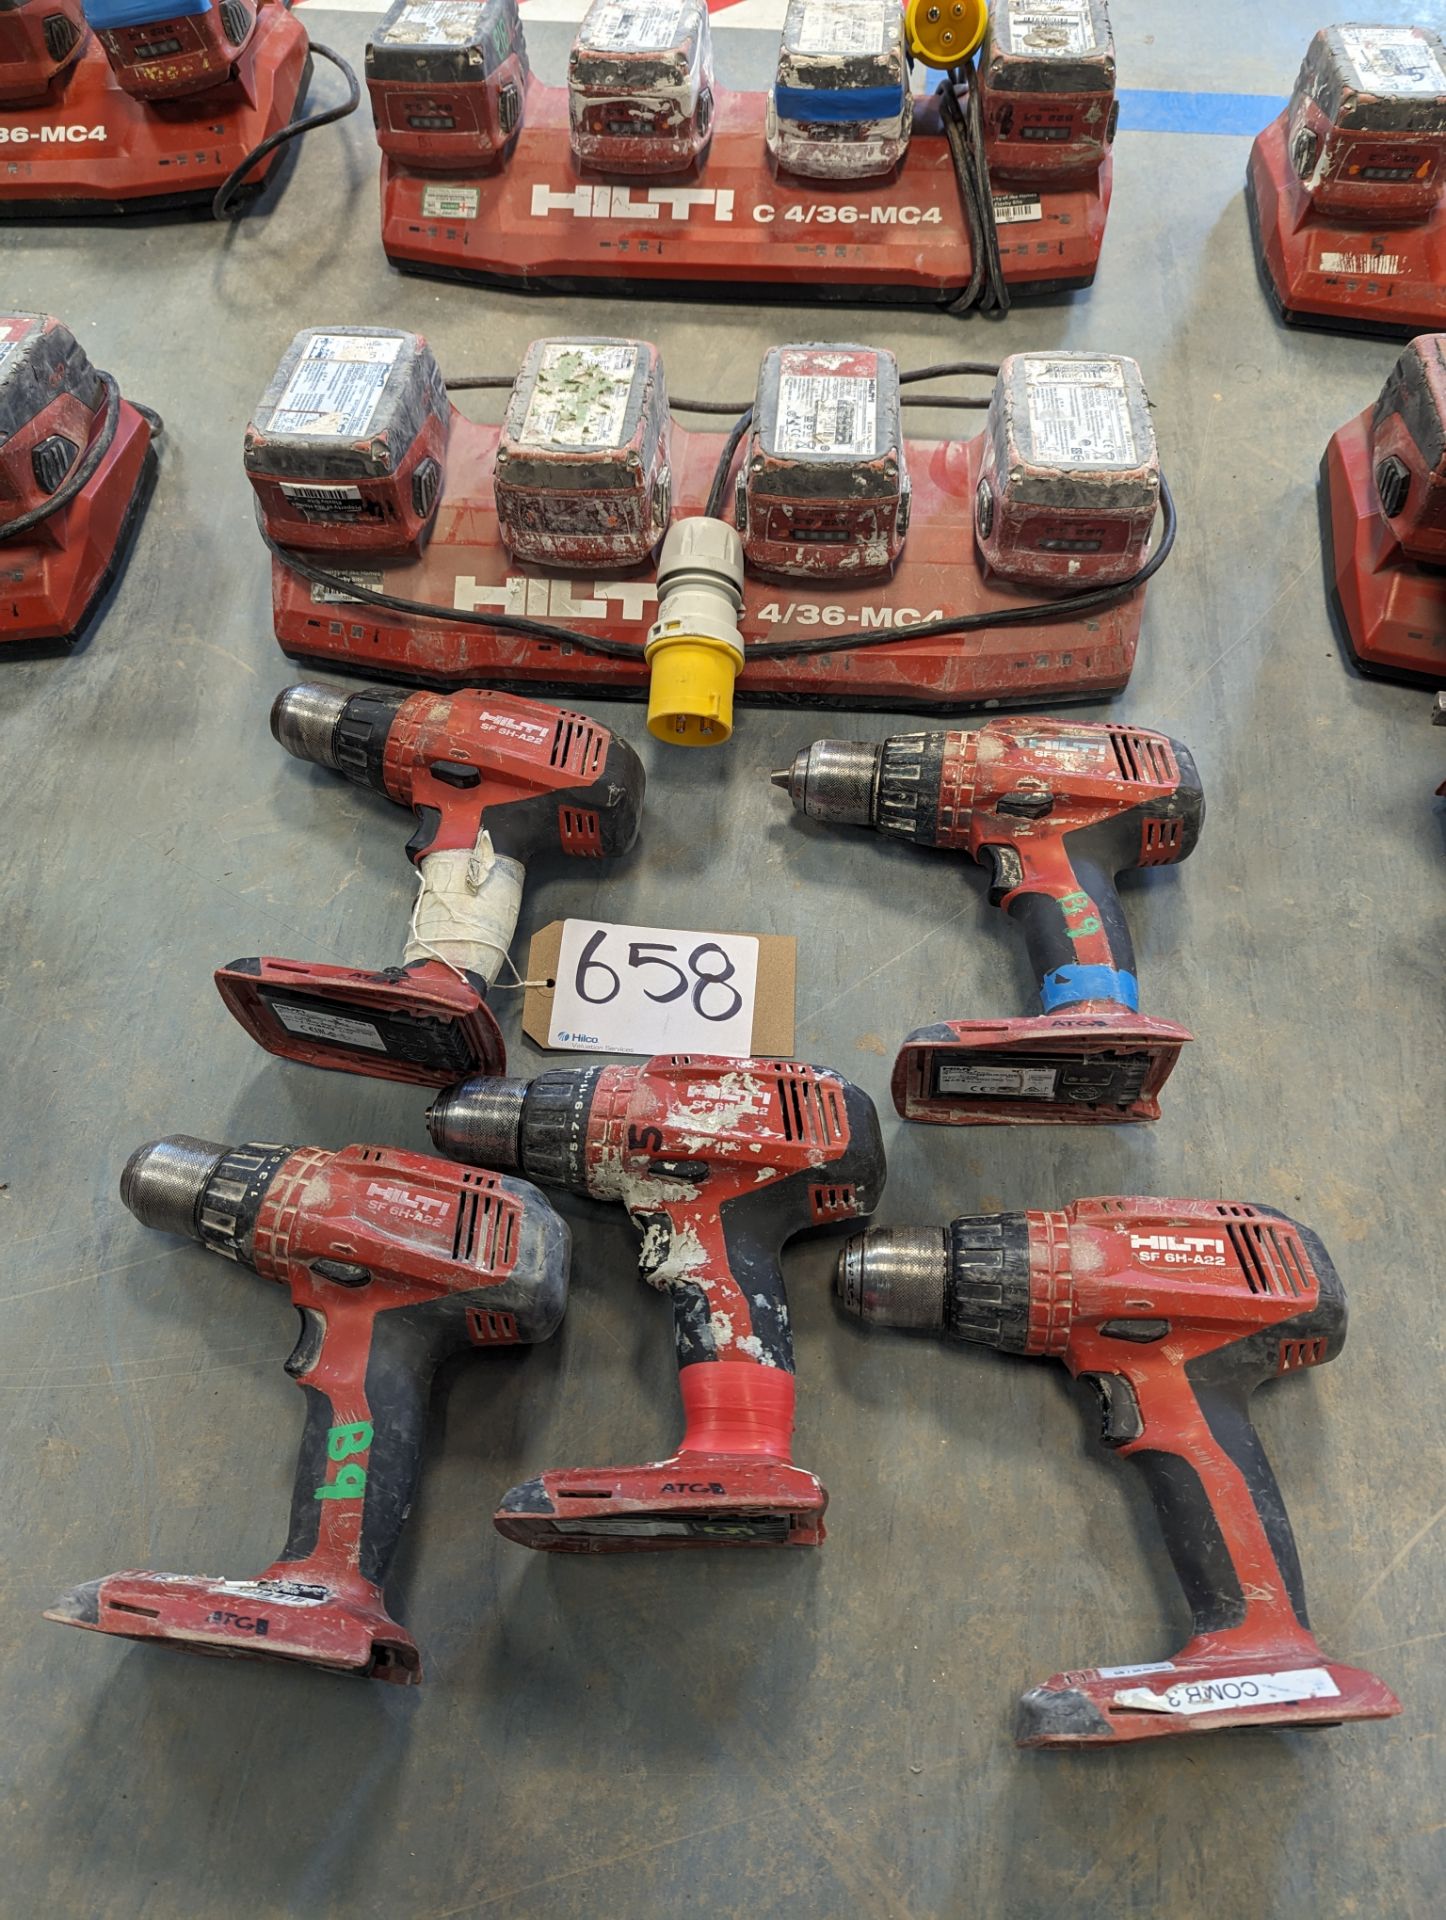 (5) Hilti SF 6H-A22 Cordless Hanner Drills with (2) Hilti C 4/36-MC4 Multi Bay Charger with 4 Batter